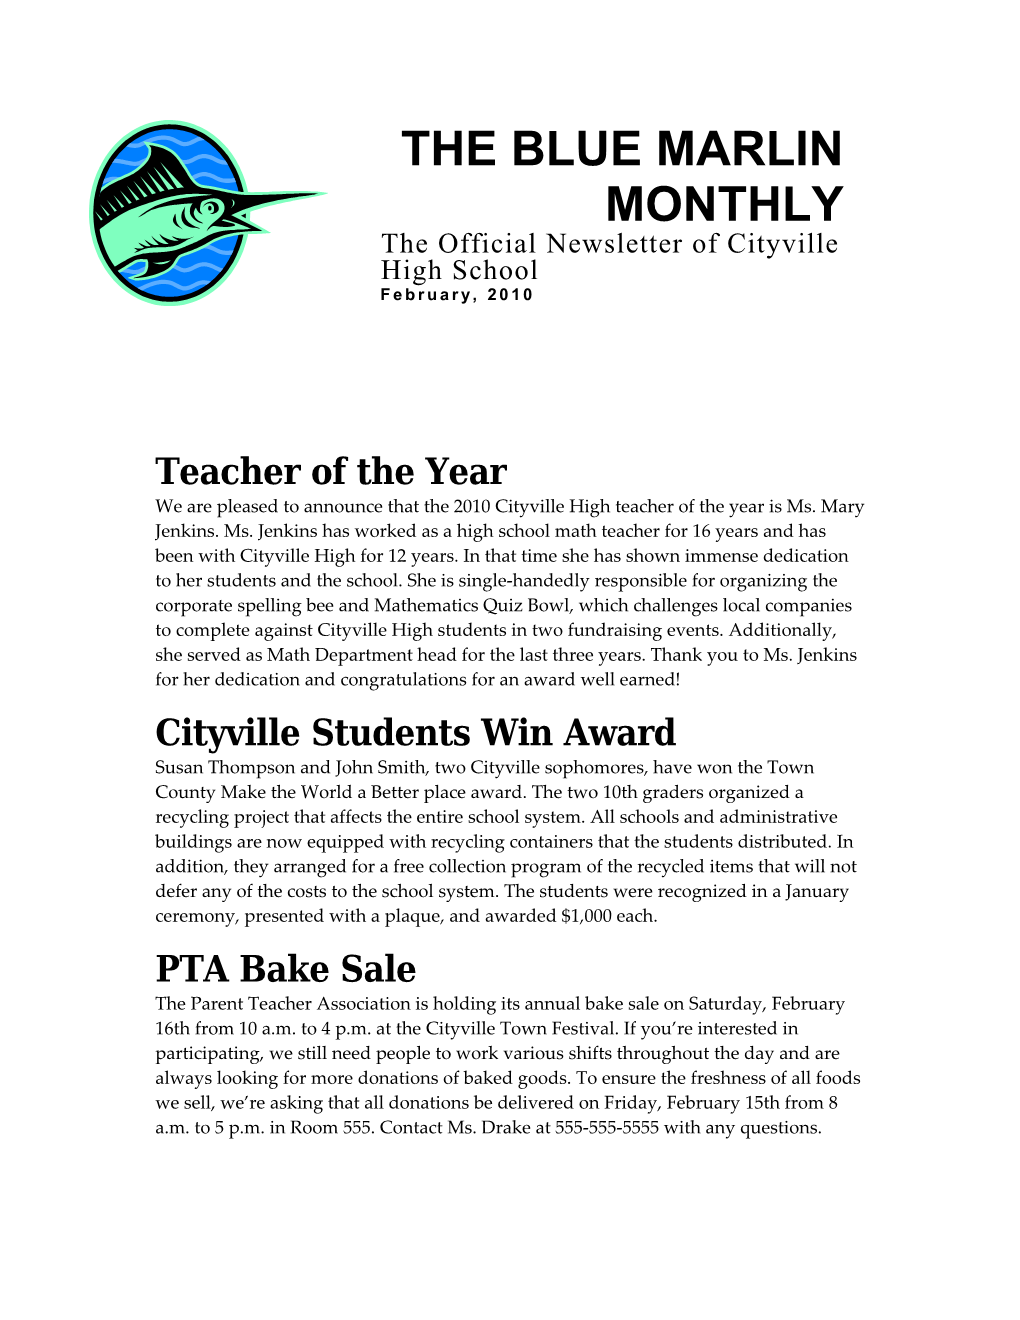 The Official Newsletter of Cityville High School